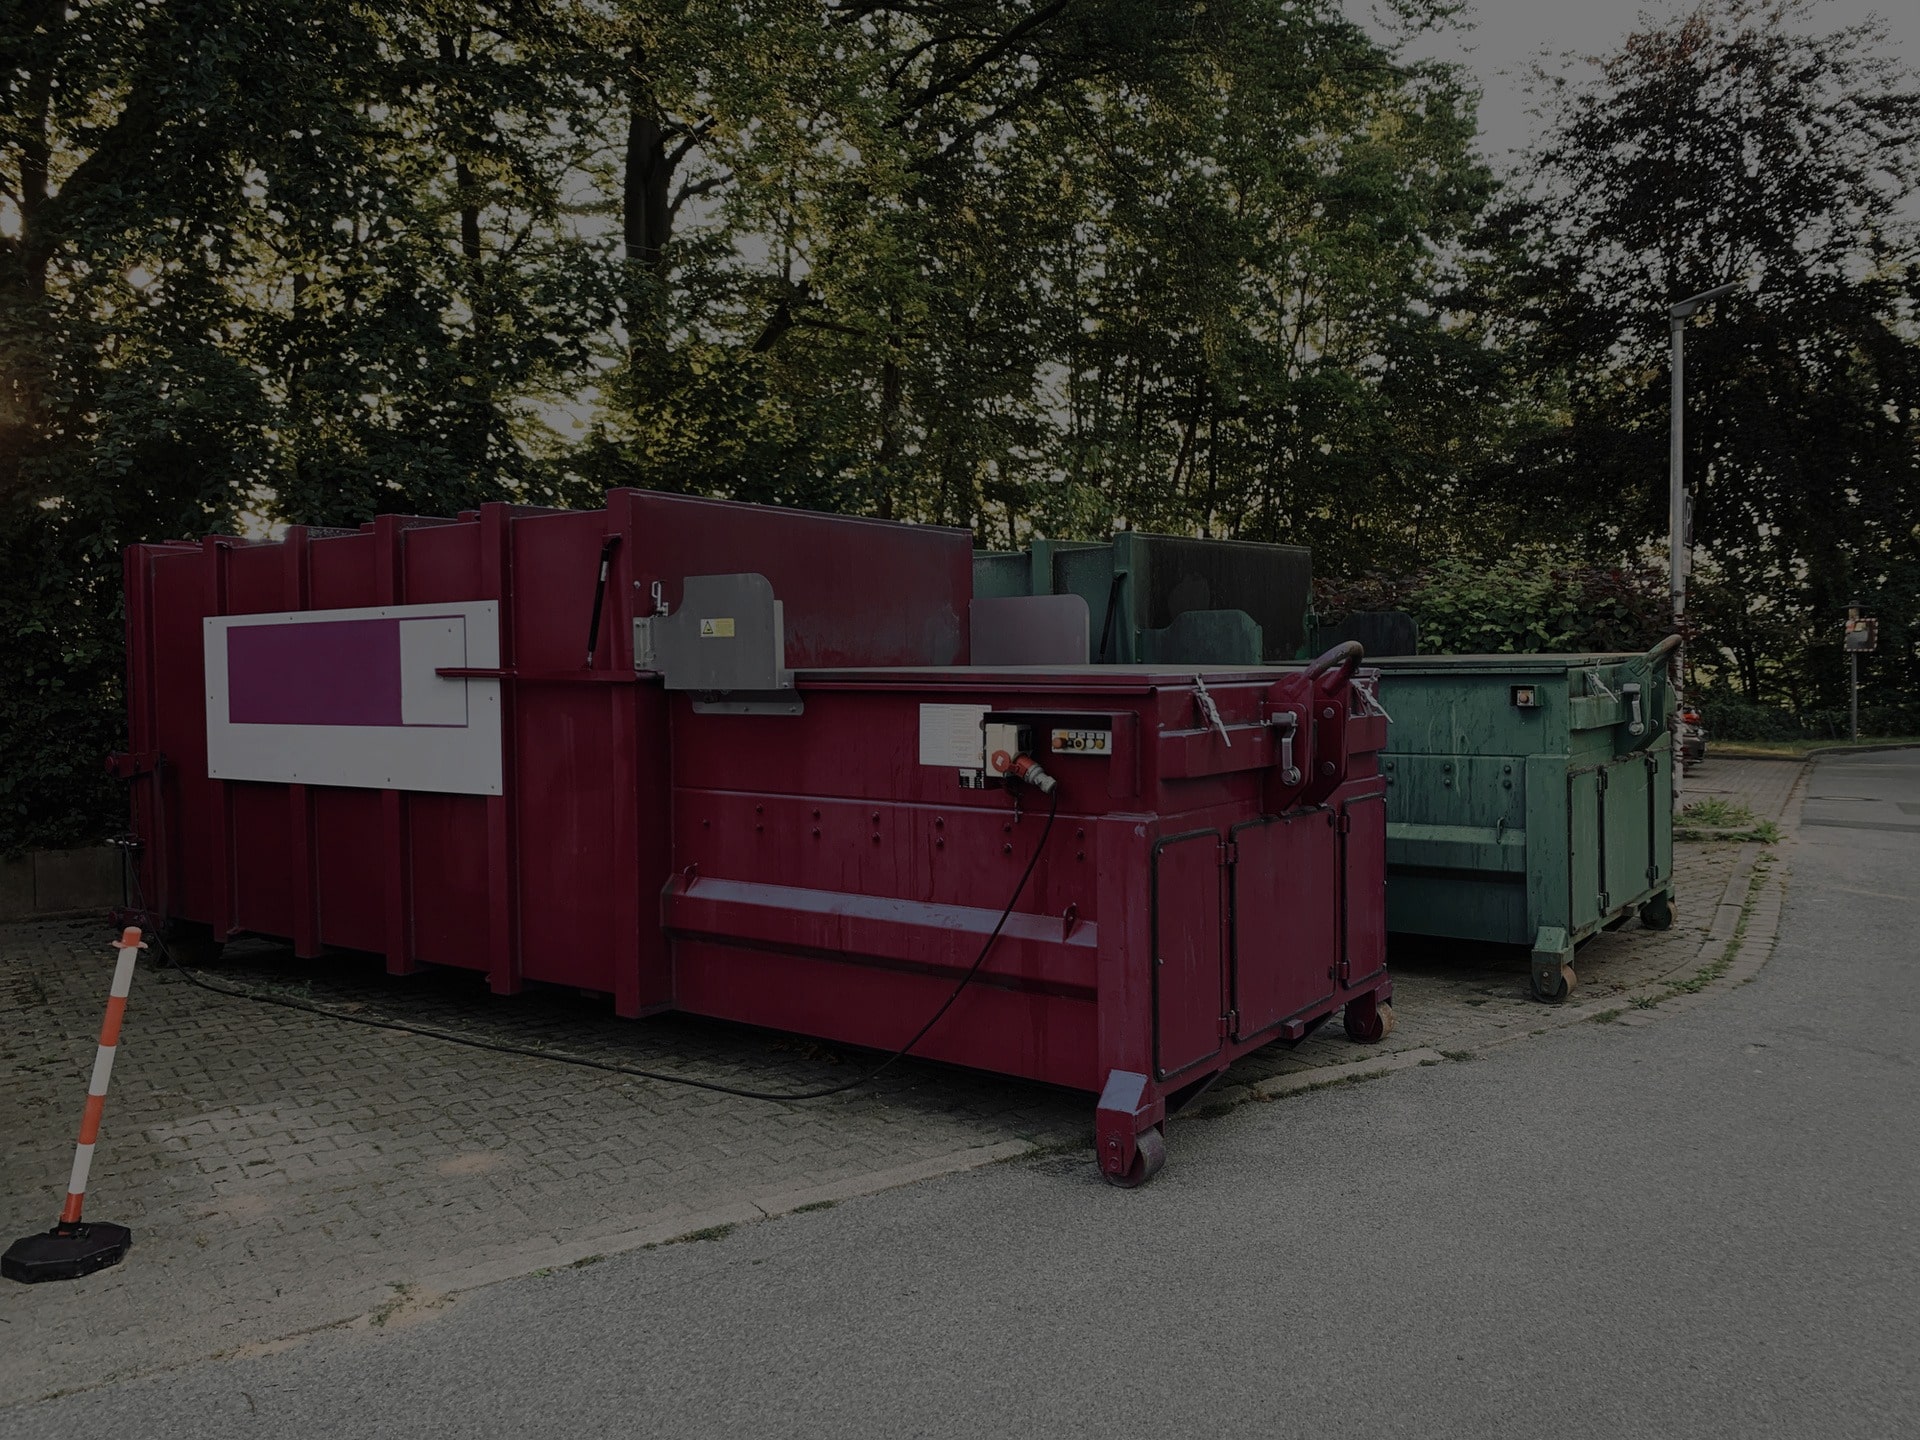 A Trash Compactor’s Operation